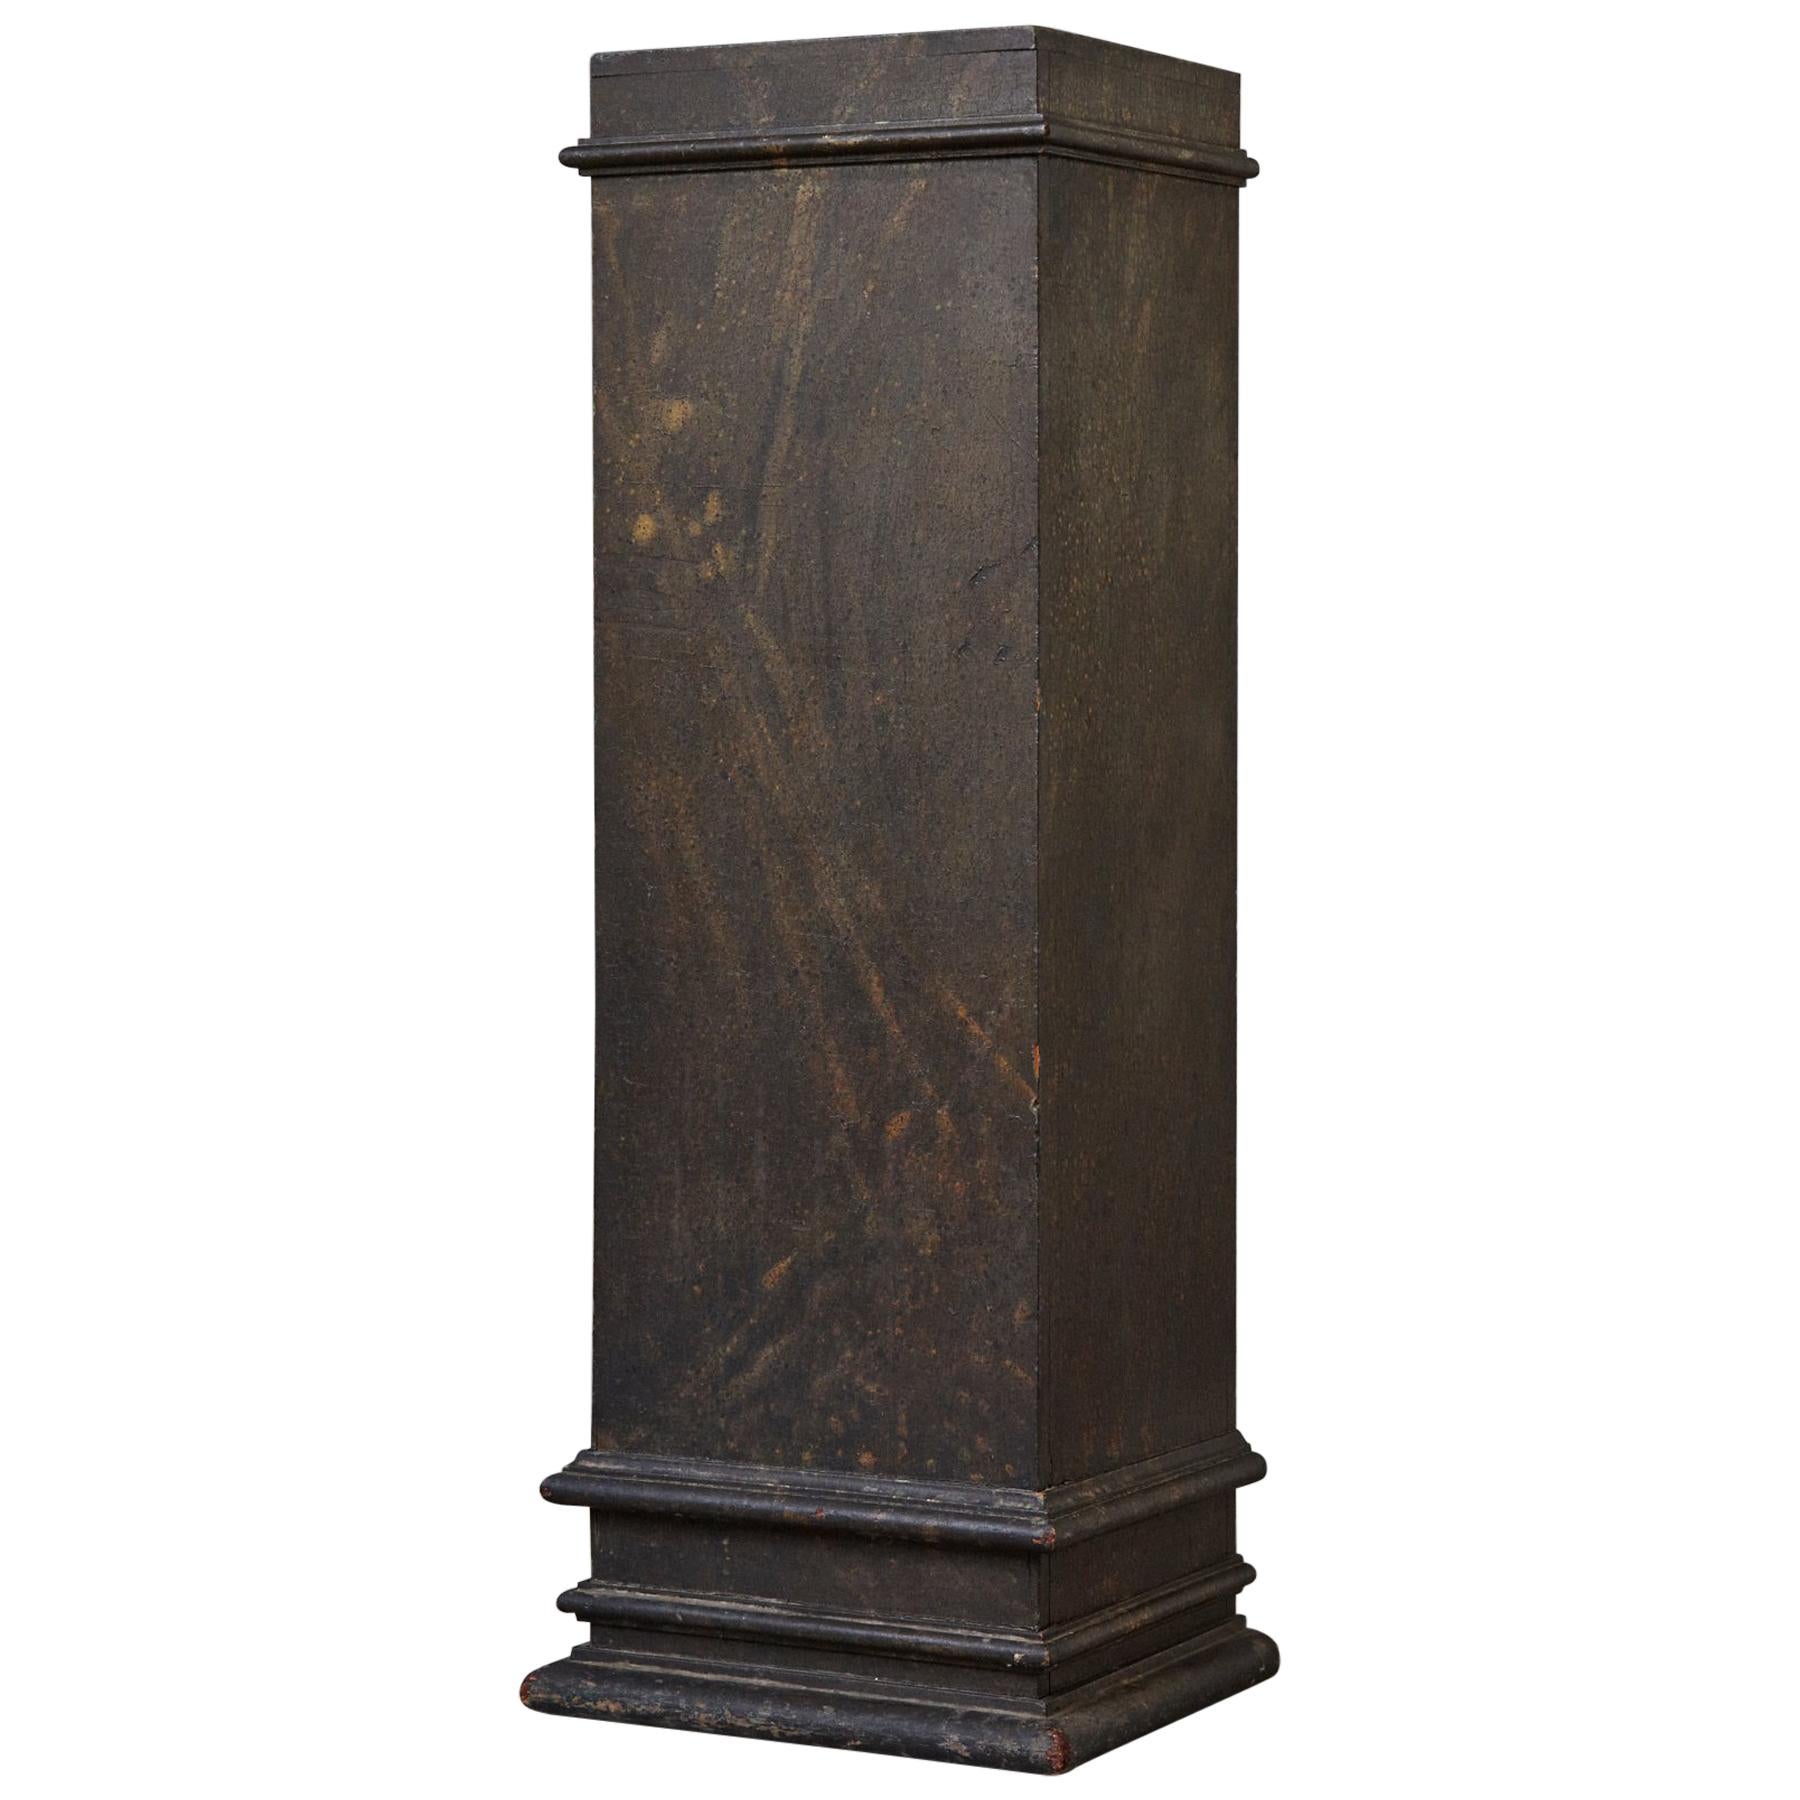 19th Century Swedish Hand-Painted Pedestal with Faux Marbleized Pattern